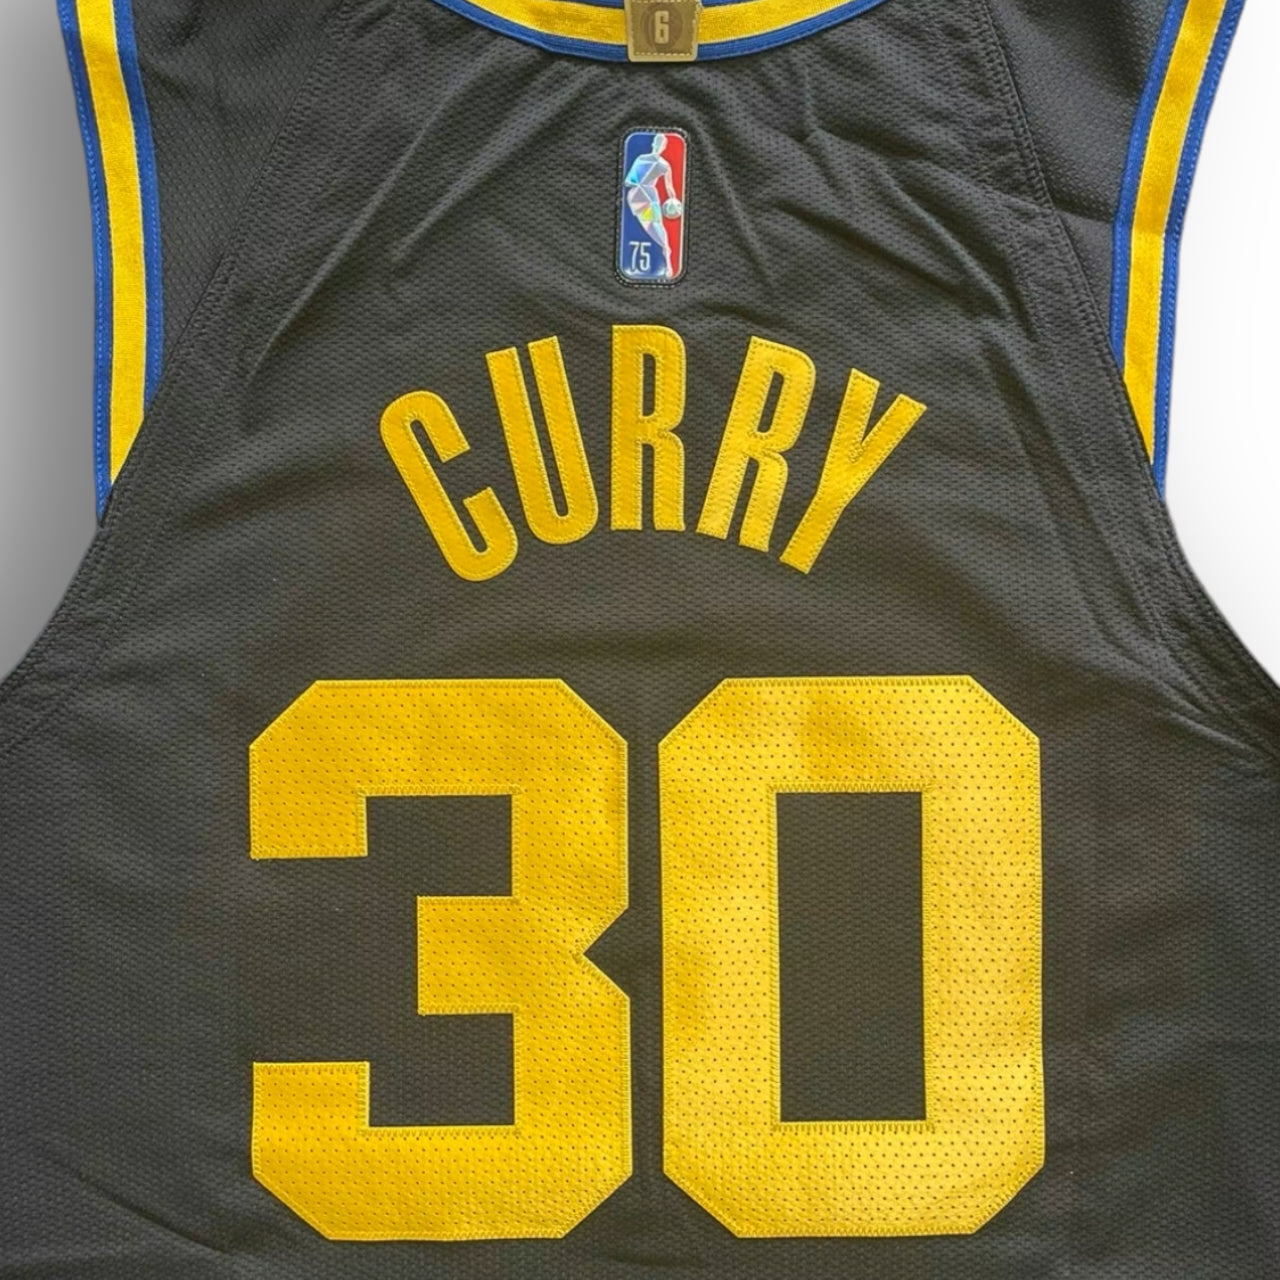 Stephen Curry Golden State Warriors 2021-2022 City Edition Nike Authentic Jersey Black, Yellow - Hoop Jersey Store